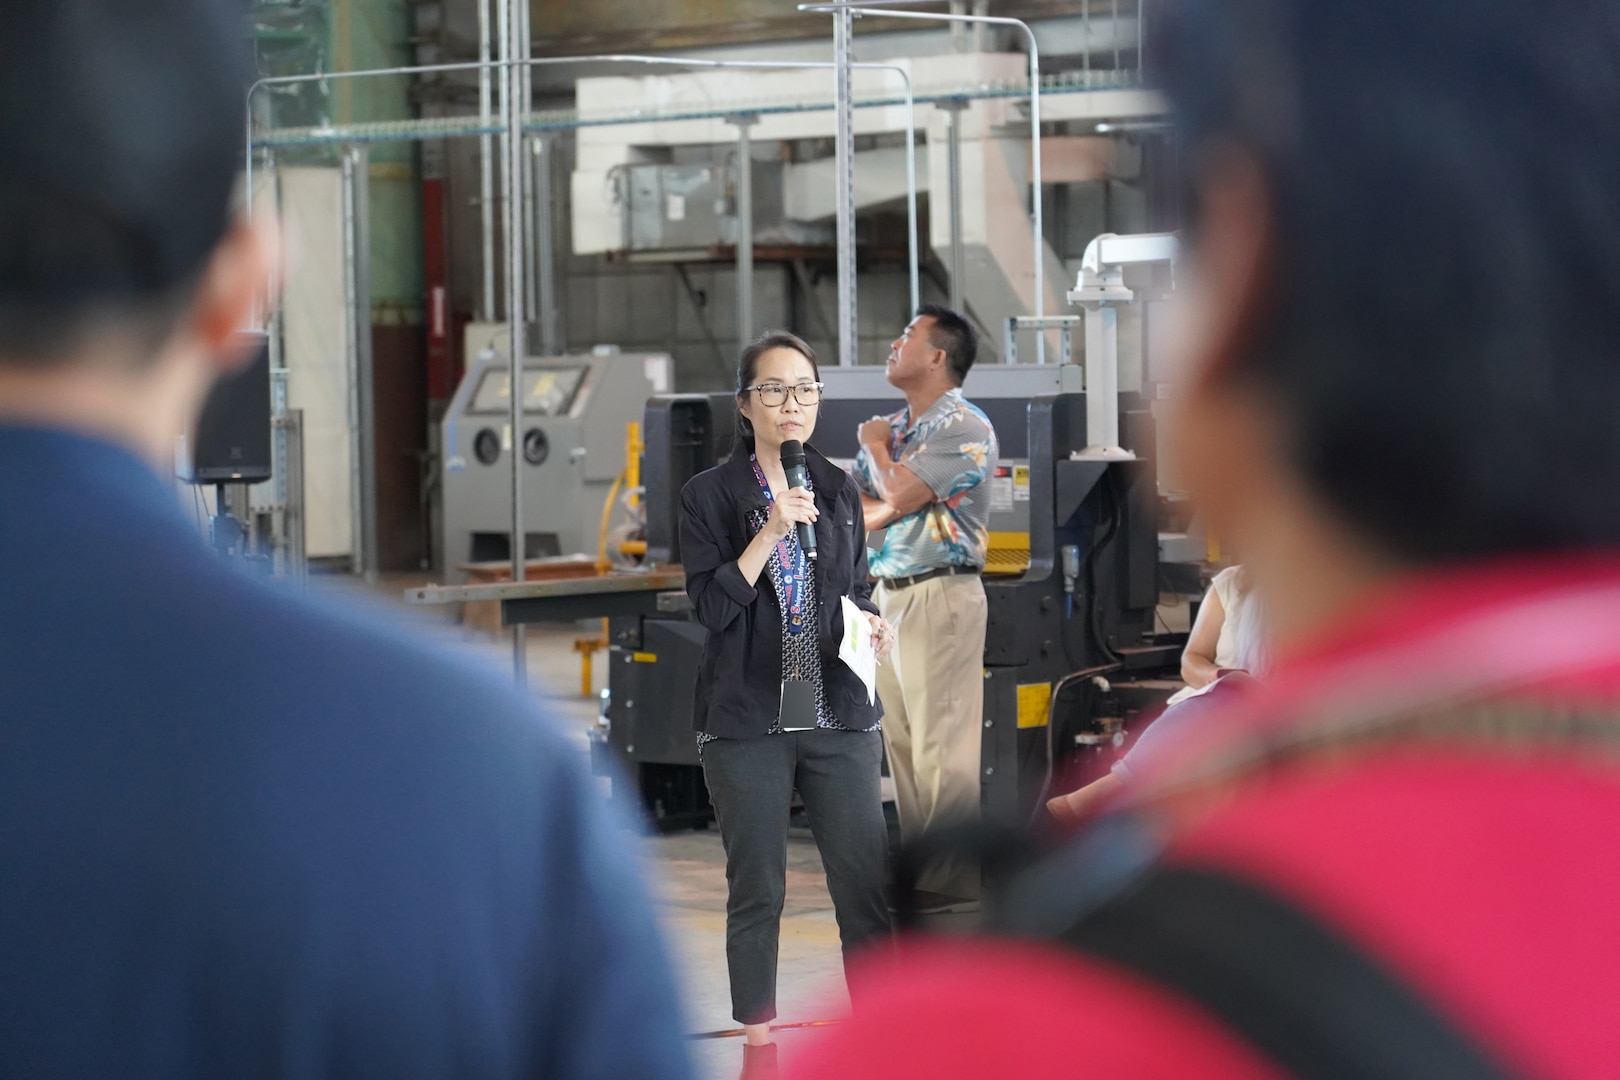 Shipyard Infrastructure Optimization Program Department Director Joanna Victorino, center, briefs shipyard personnel during a Town Hall held at the Structural Shop at Pearl Harbor Naval Shipyard.